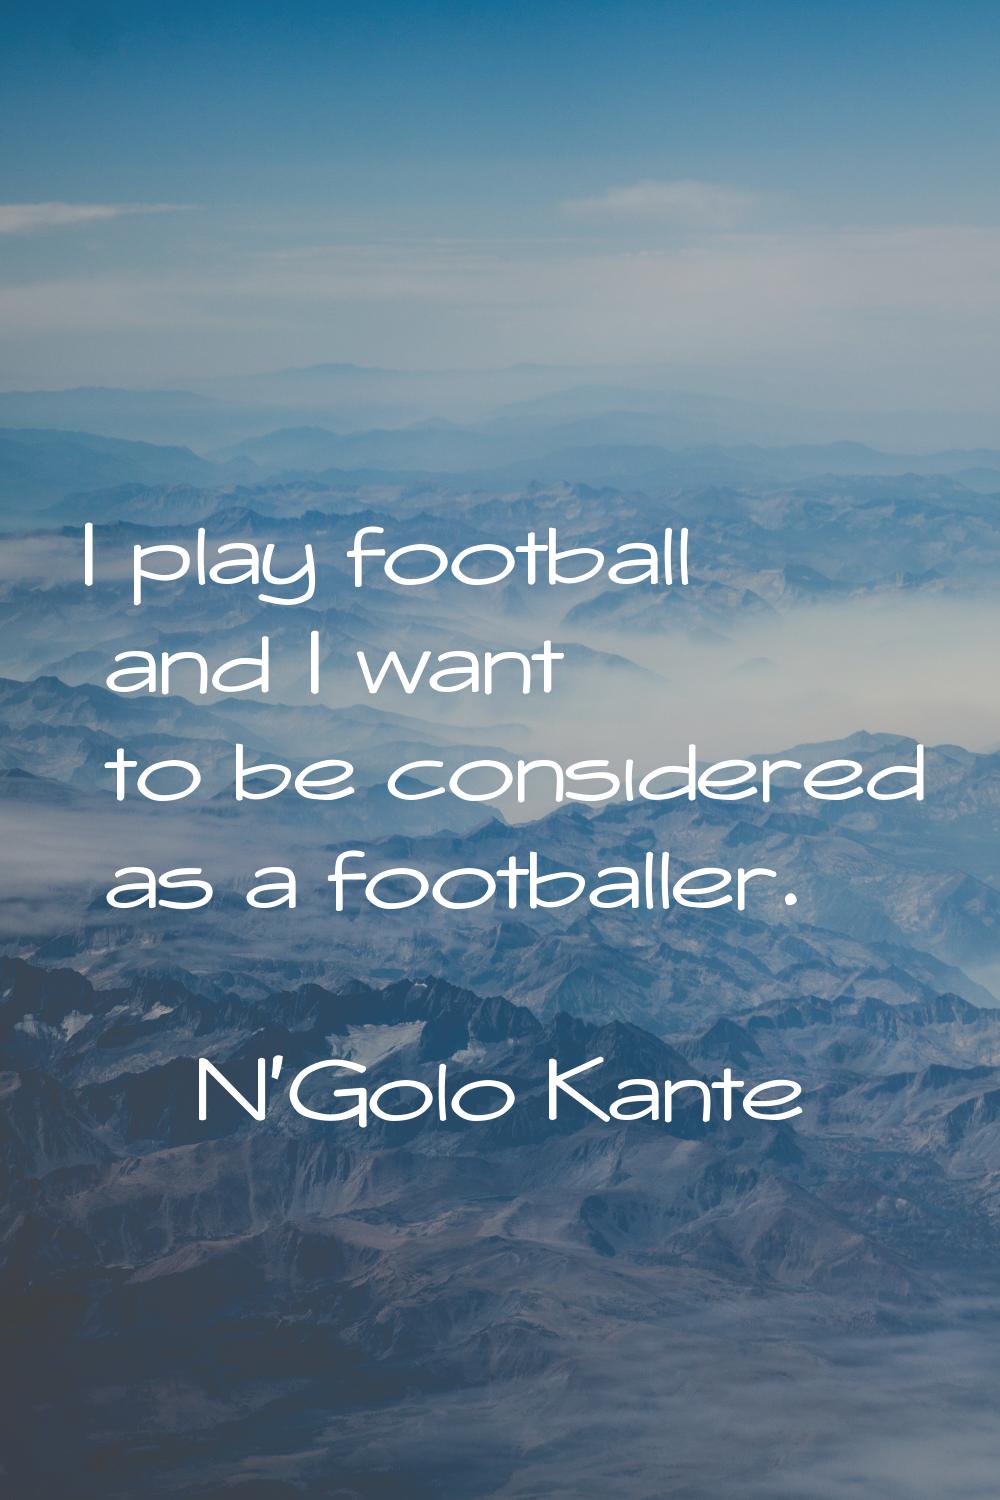 I play football and I want to be considered as a footballer.